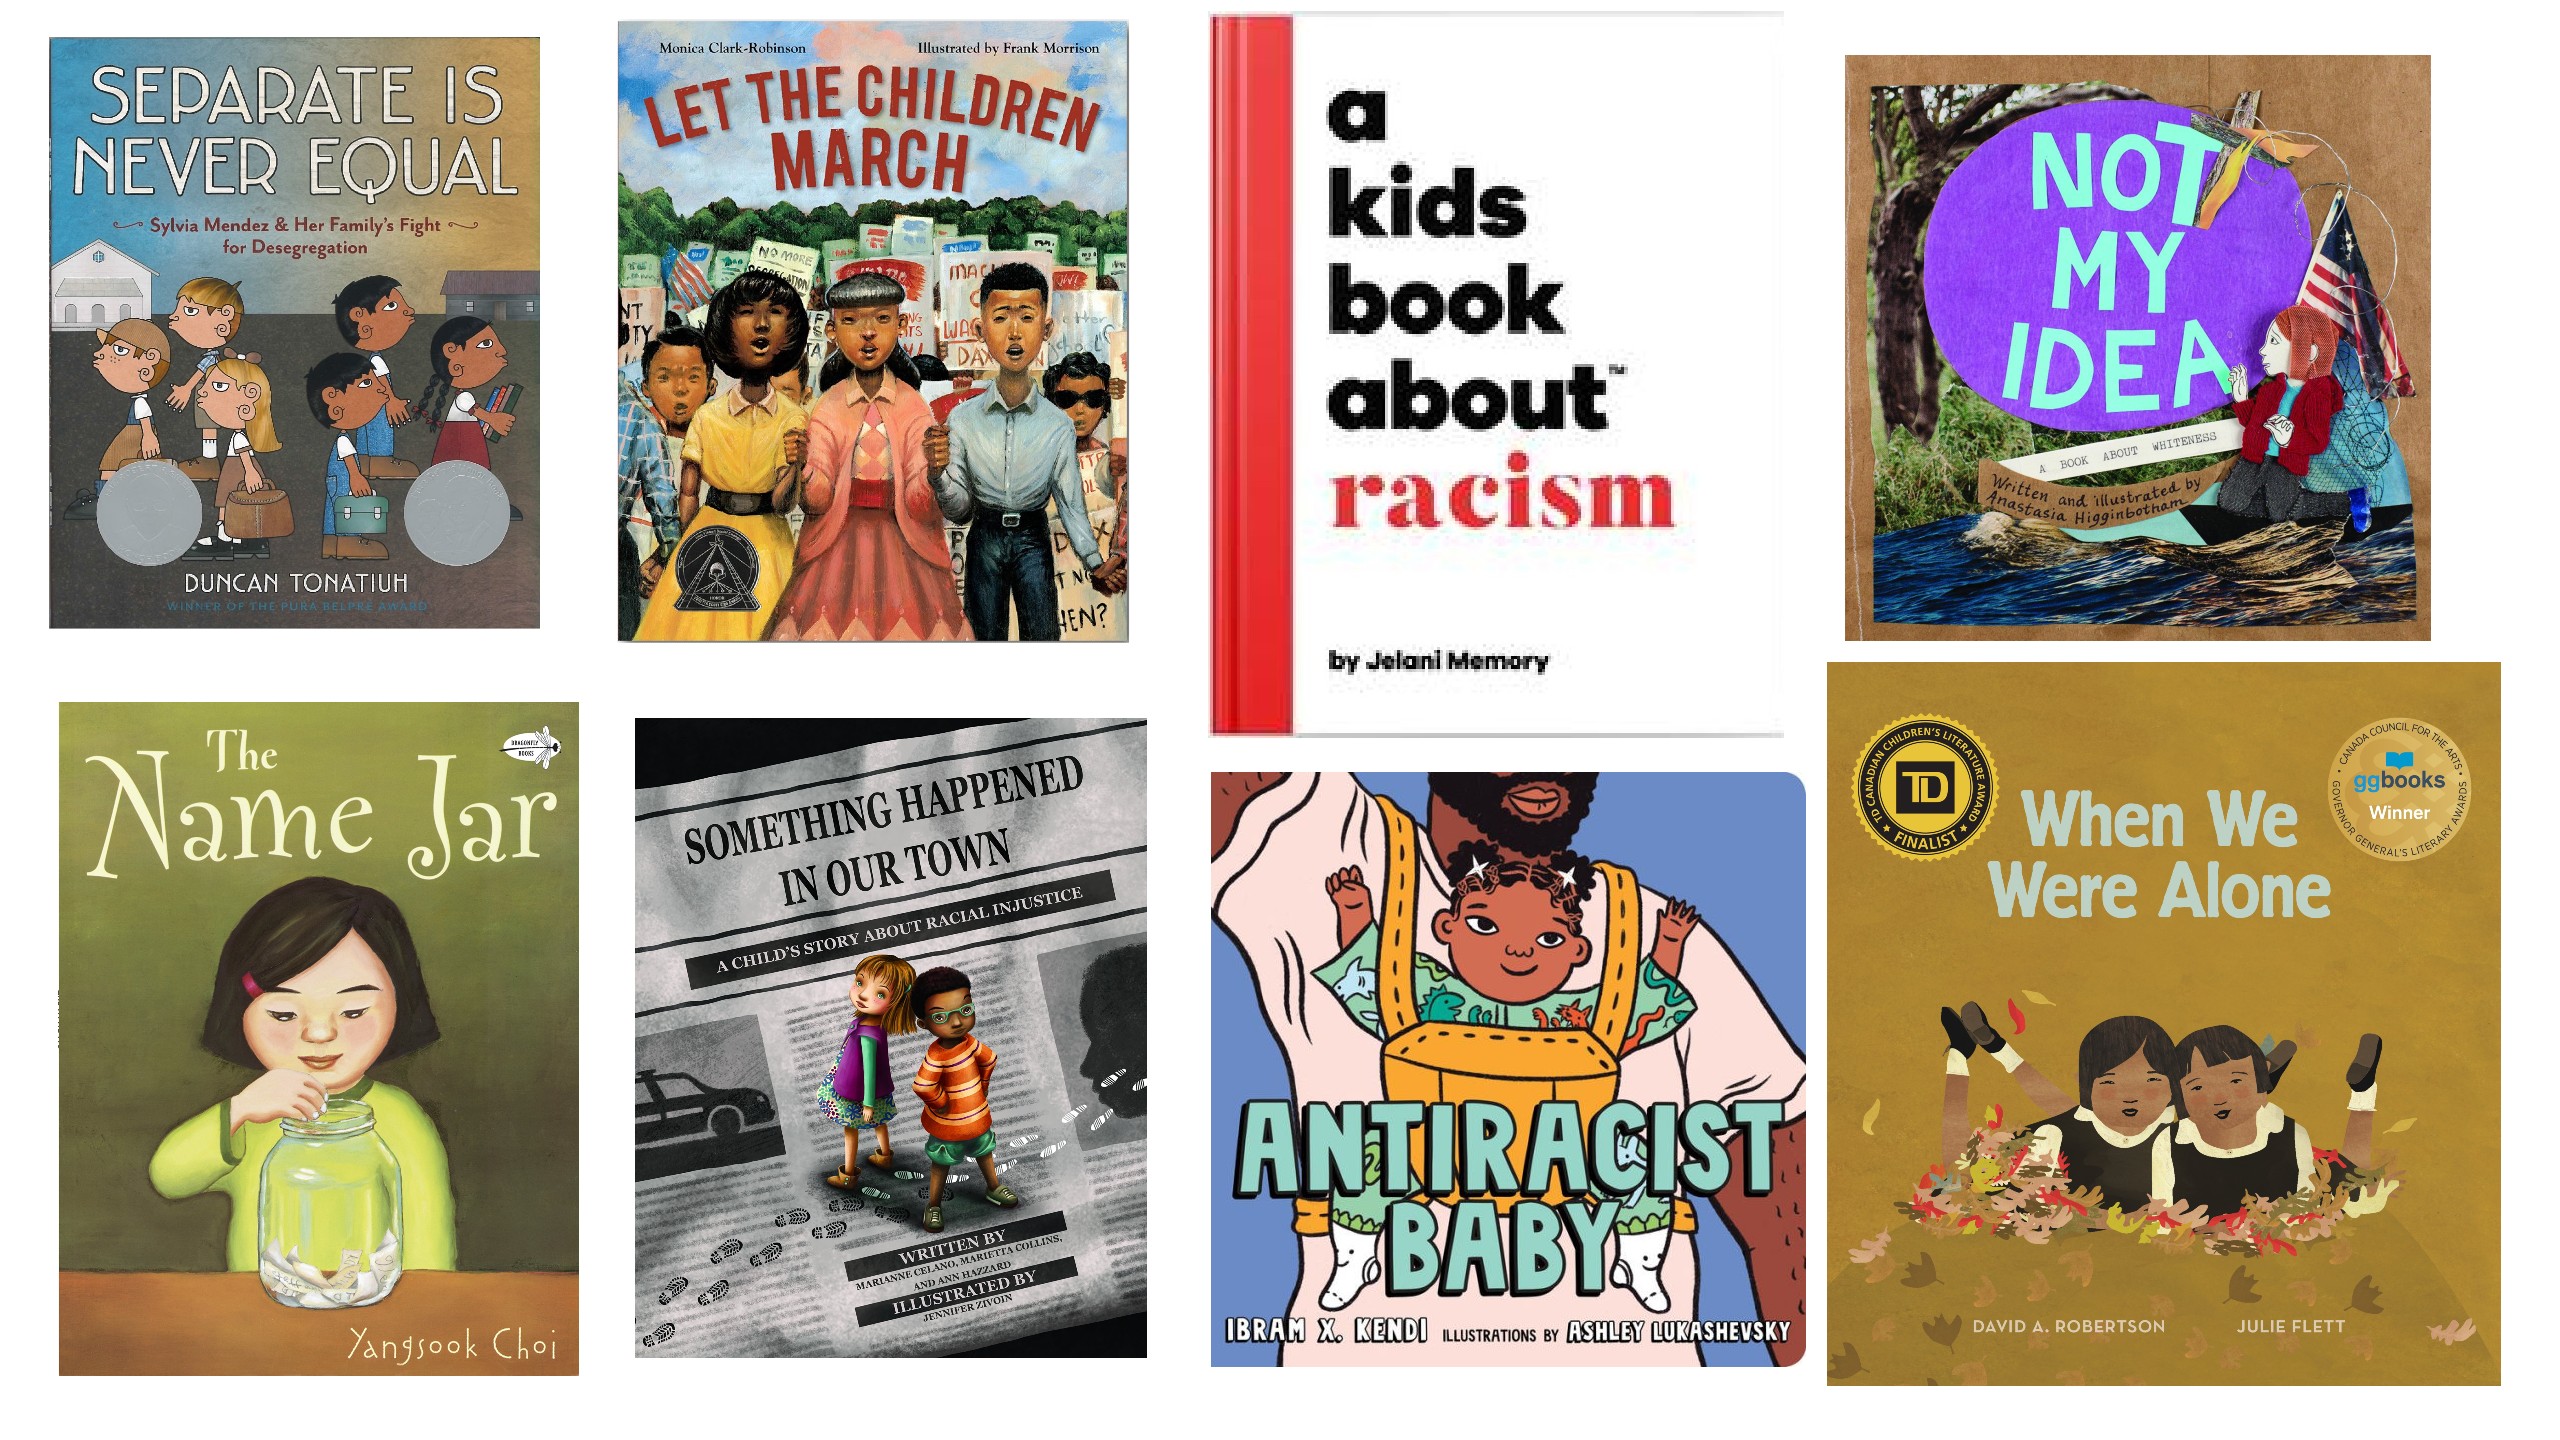 books about race and education